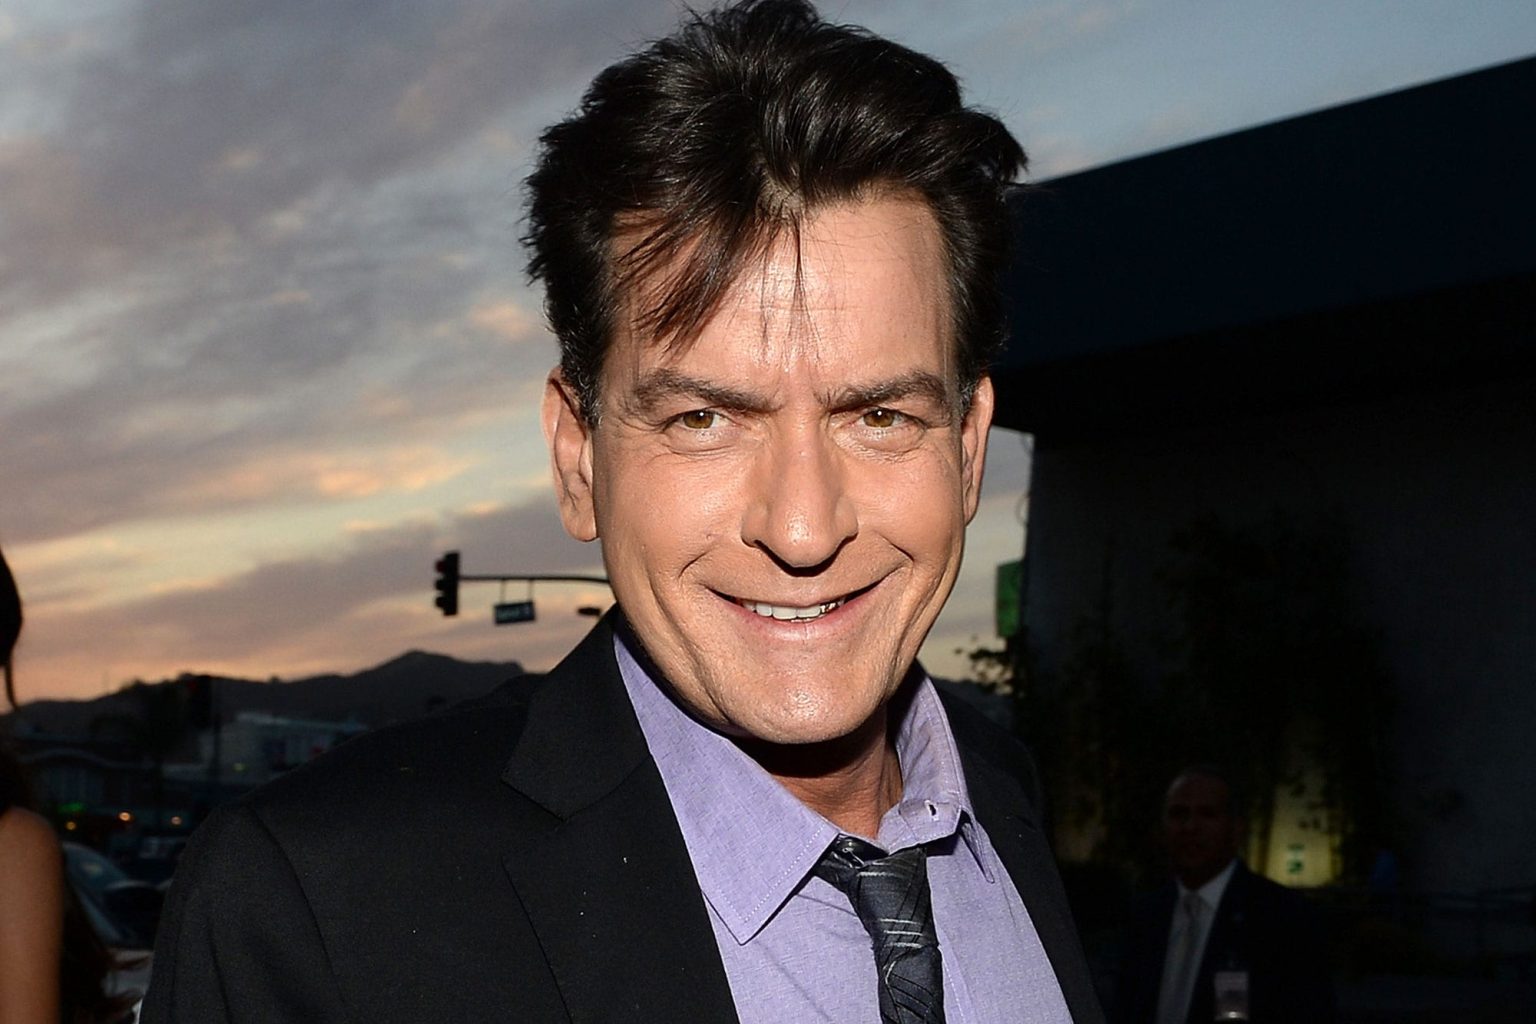 Charlie Sheen Ethnicity, Race and Nationality